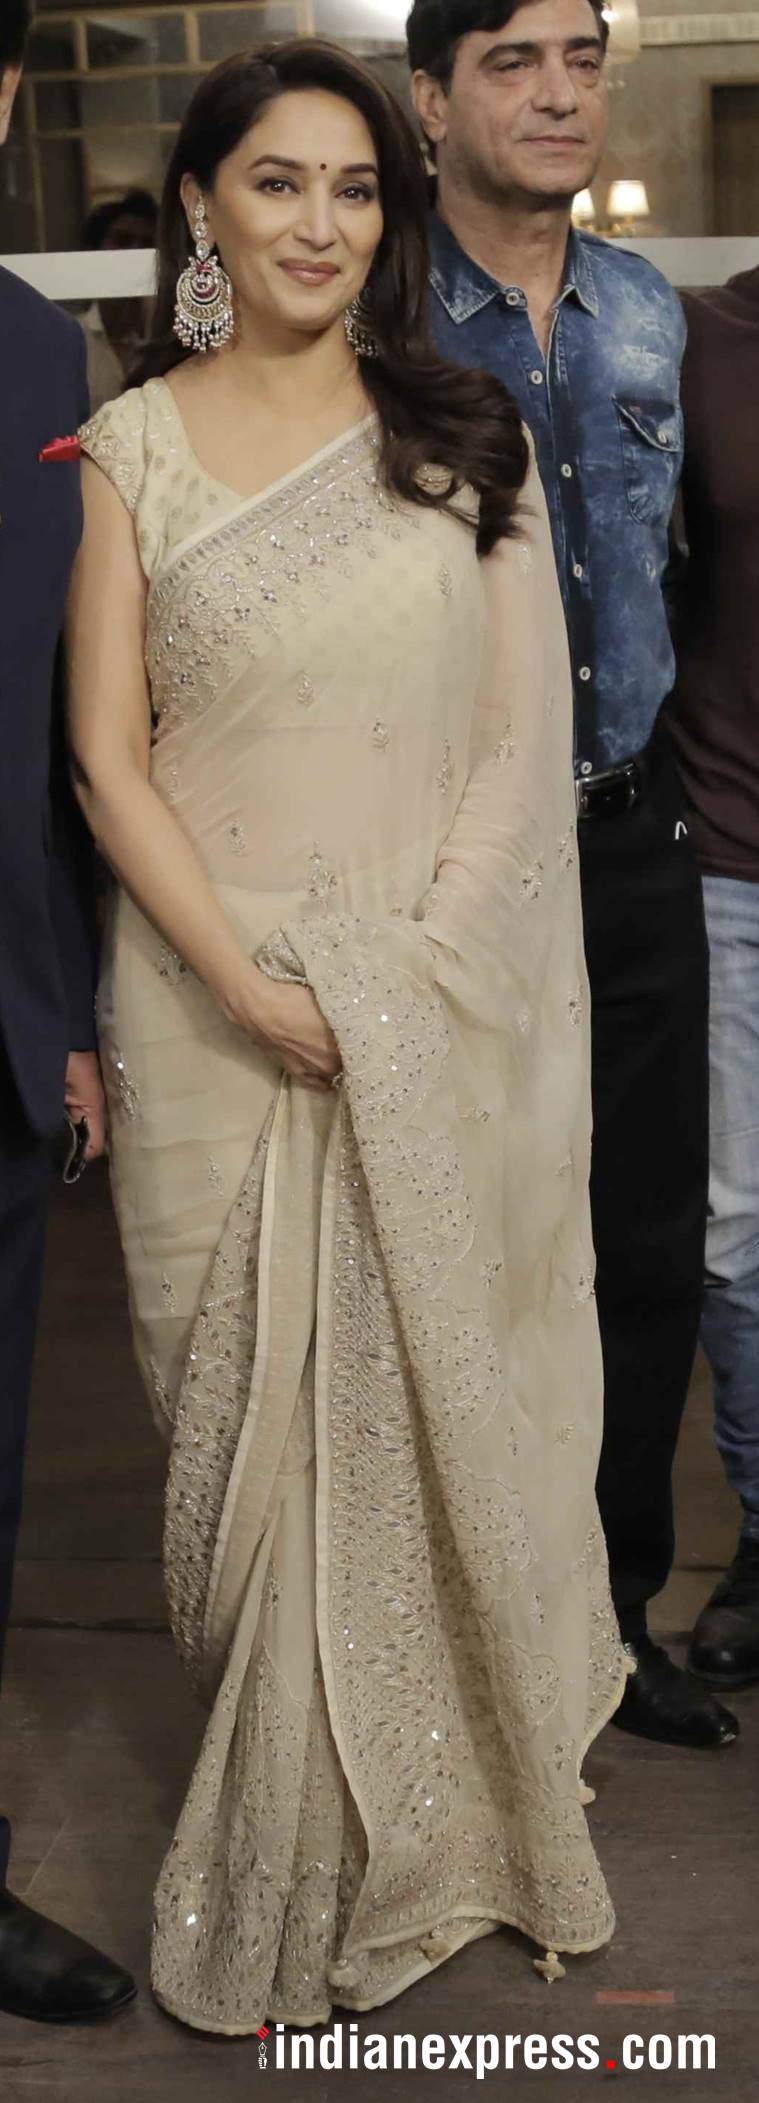 Madhuri Dixit Naket Body Massage - Madhuri Dixit's lovely Anita Dongre sari will inspire you to go for nude  ethnic wear | Fashion News, The Indian Express